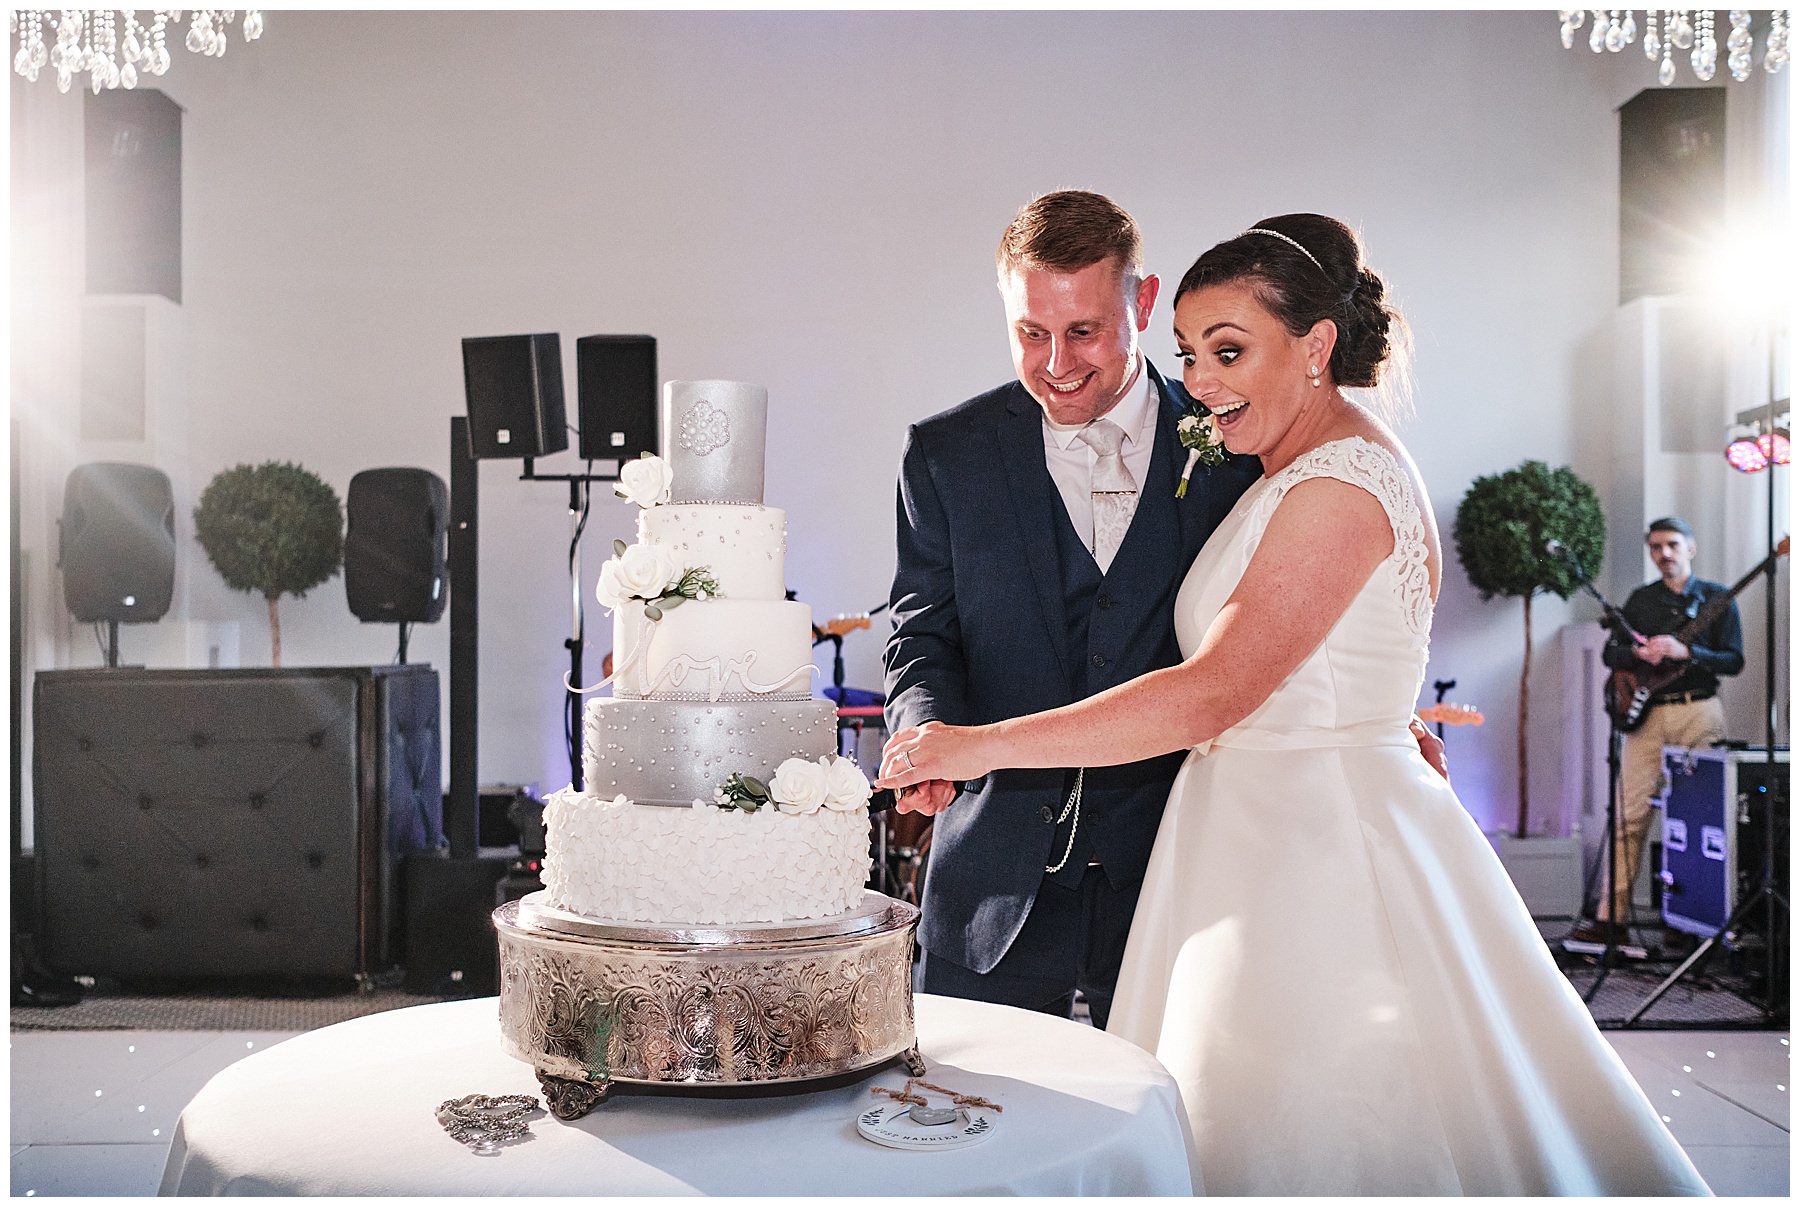 Cutting the brilliant cake from Design by Dawn at Hawkstone Hall in Shrewsbury by Documentary Wedding Photographer Stuart James